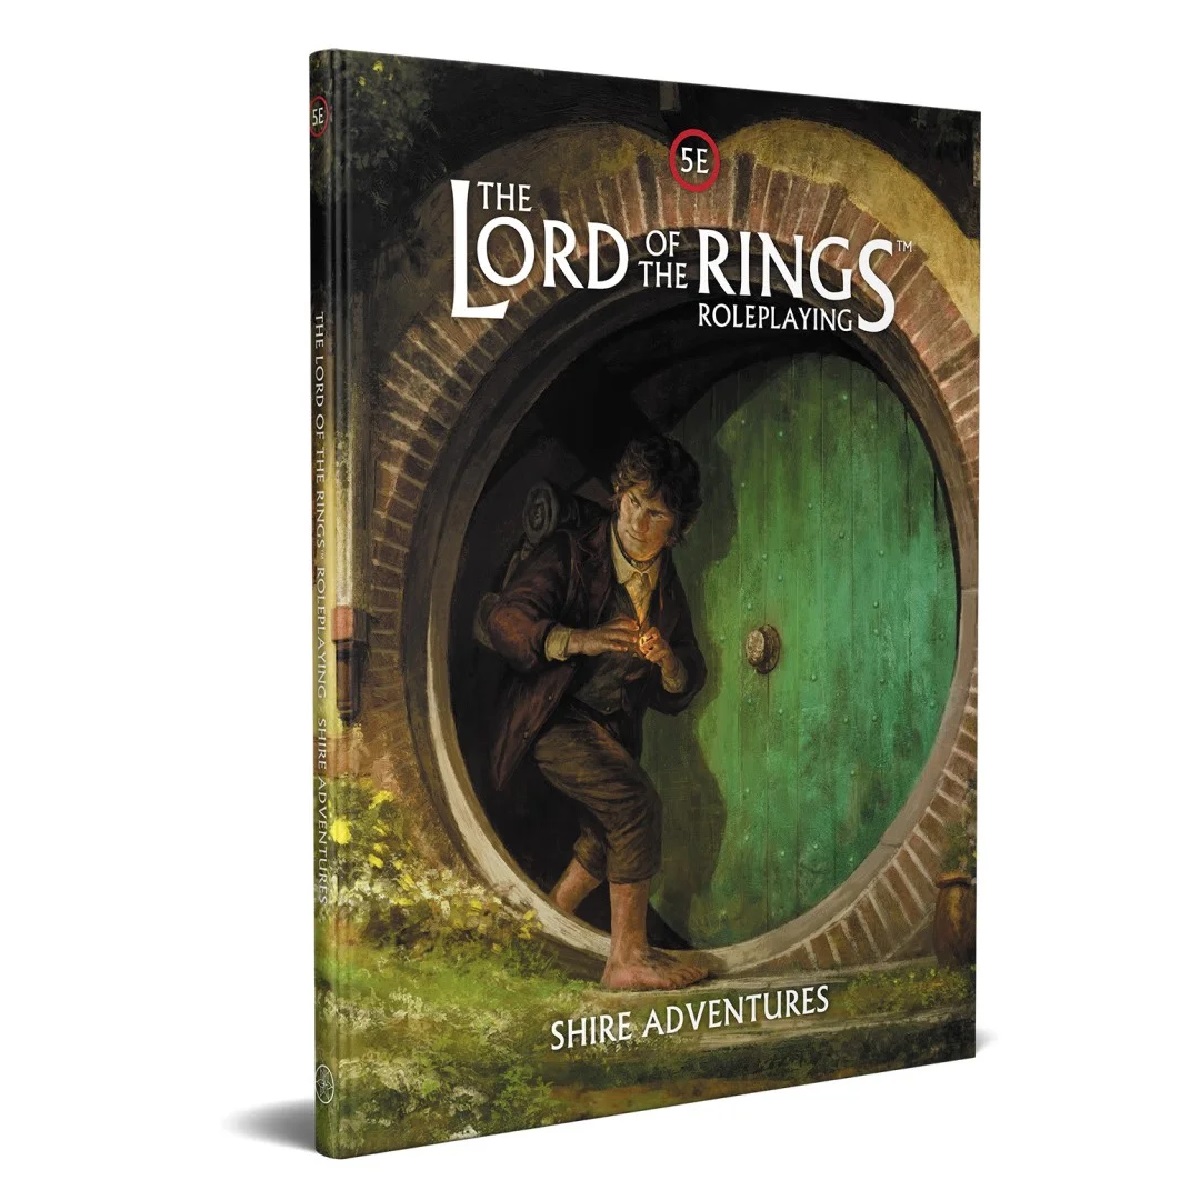 Lord of the rings shire adventures book